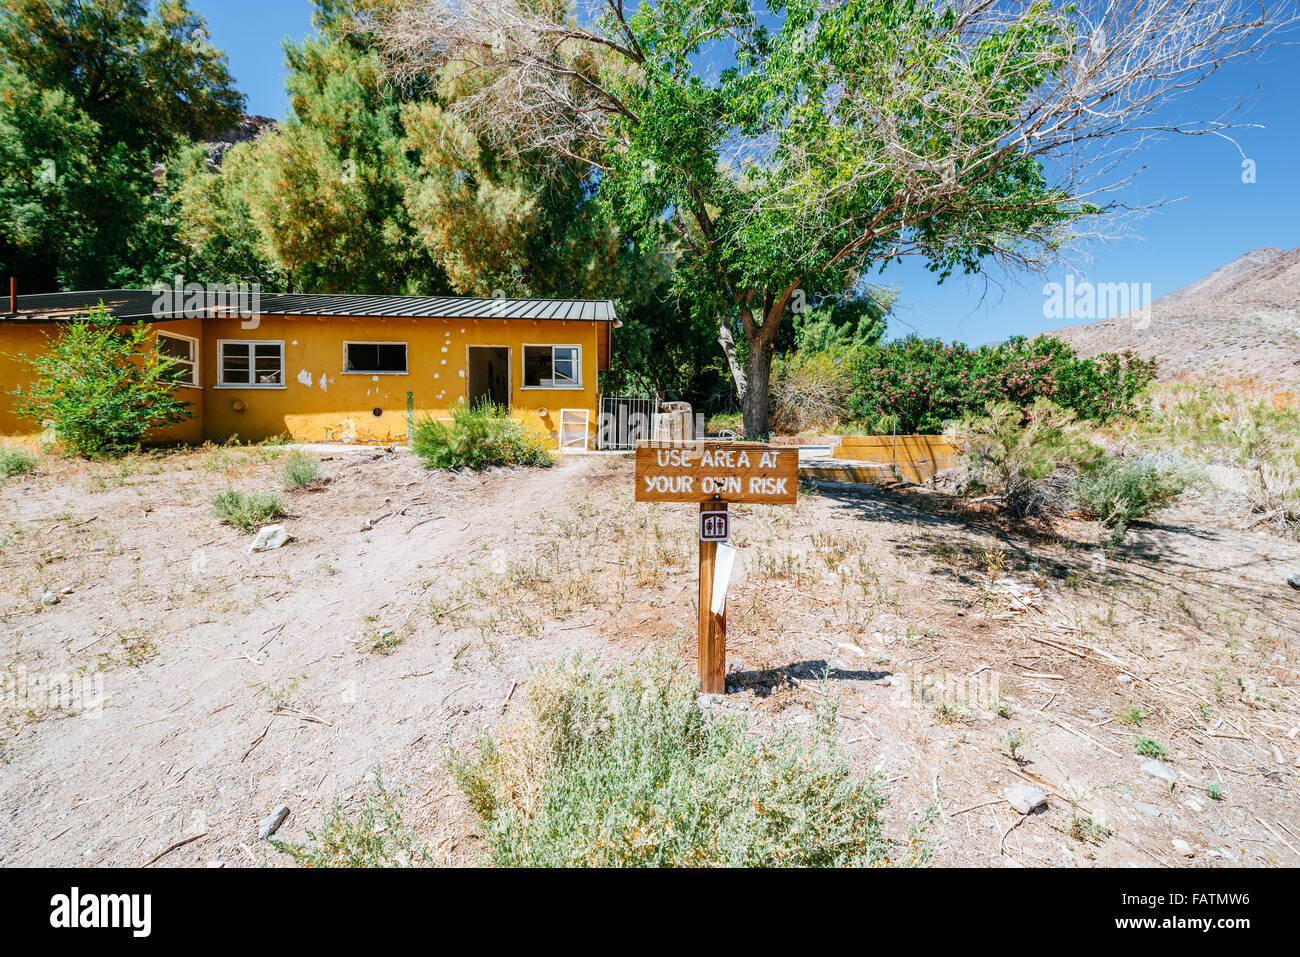 Use area at your own risk sign in an abandoned property in Death Valley, USA Stock Photo